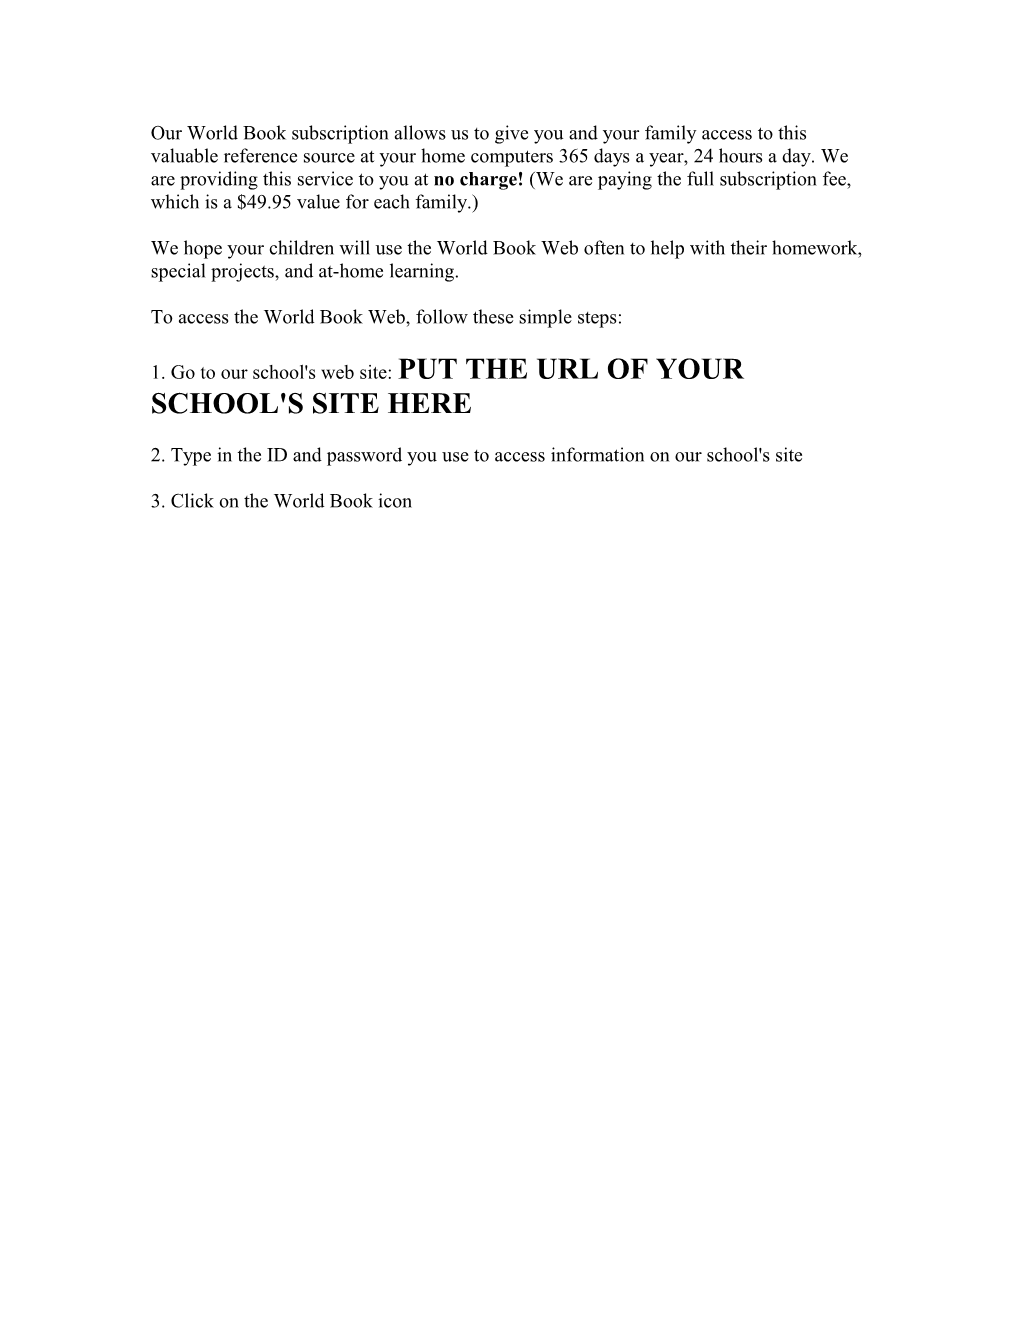 (Principal Or Superintendent: Print This Letter On Your School Letterhead